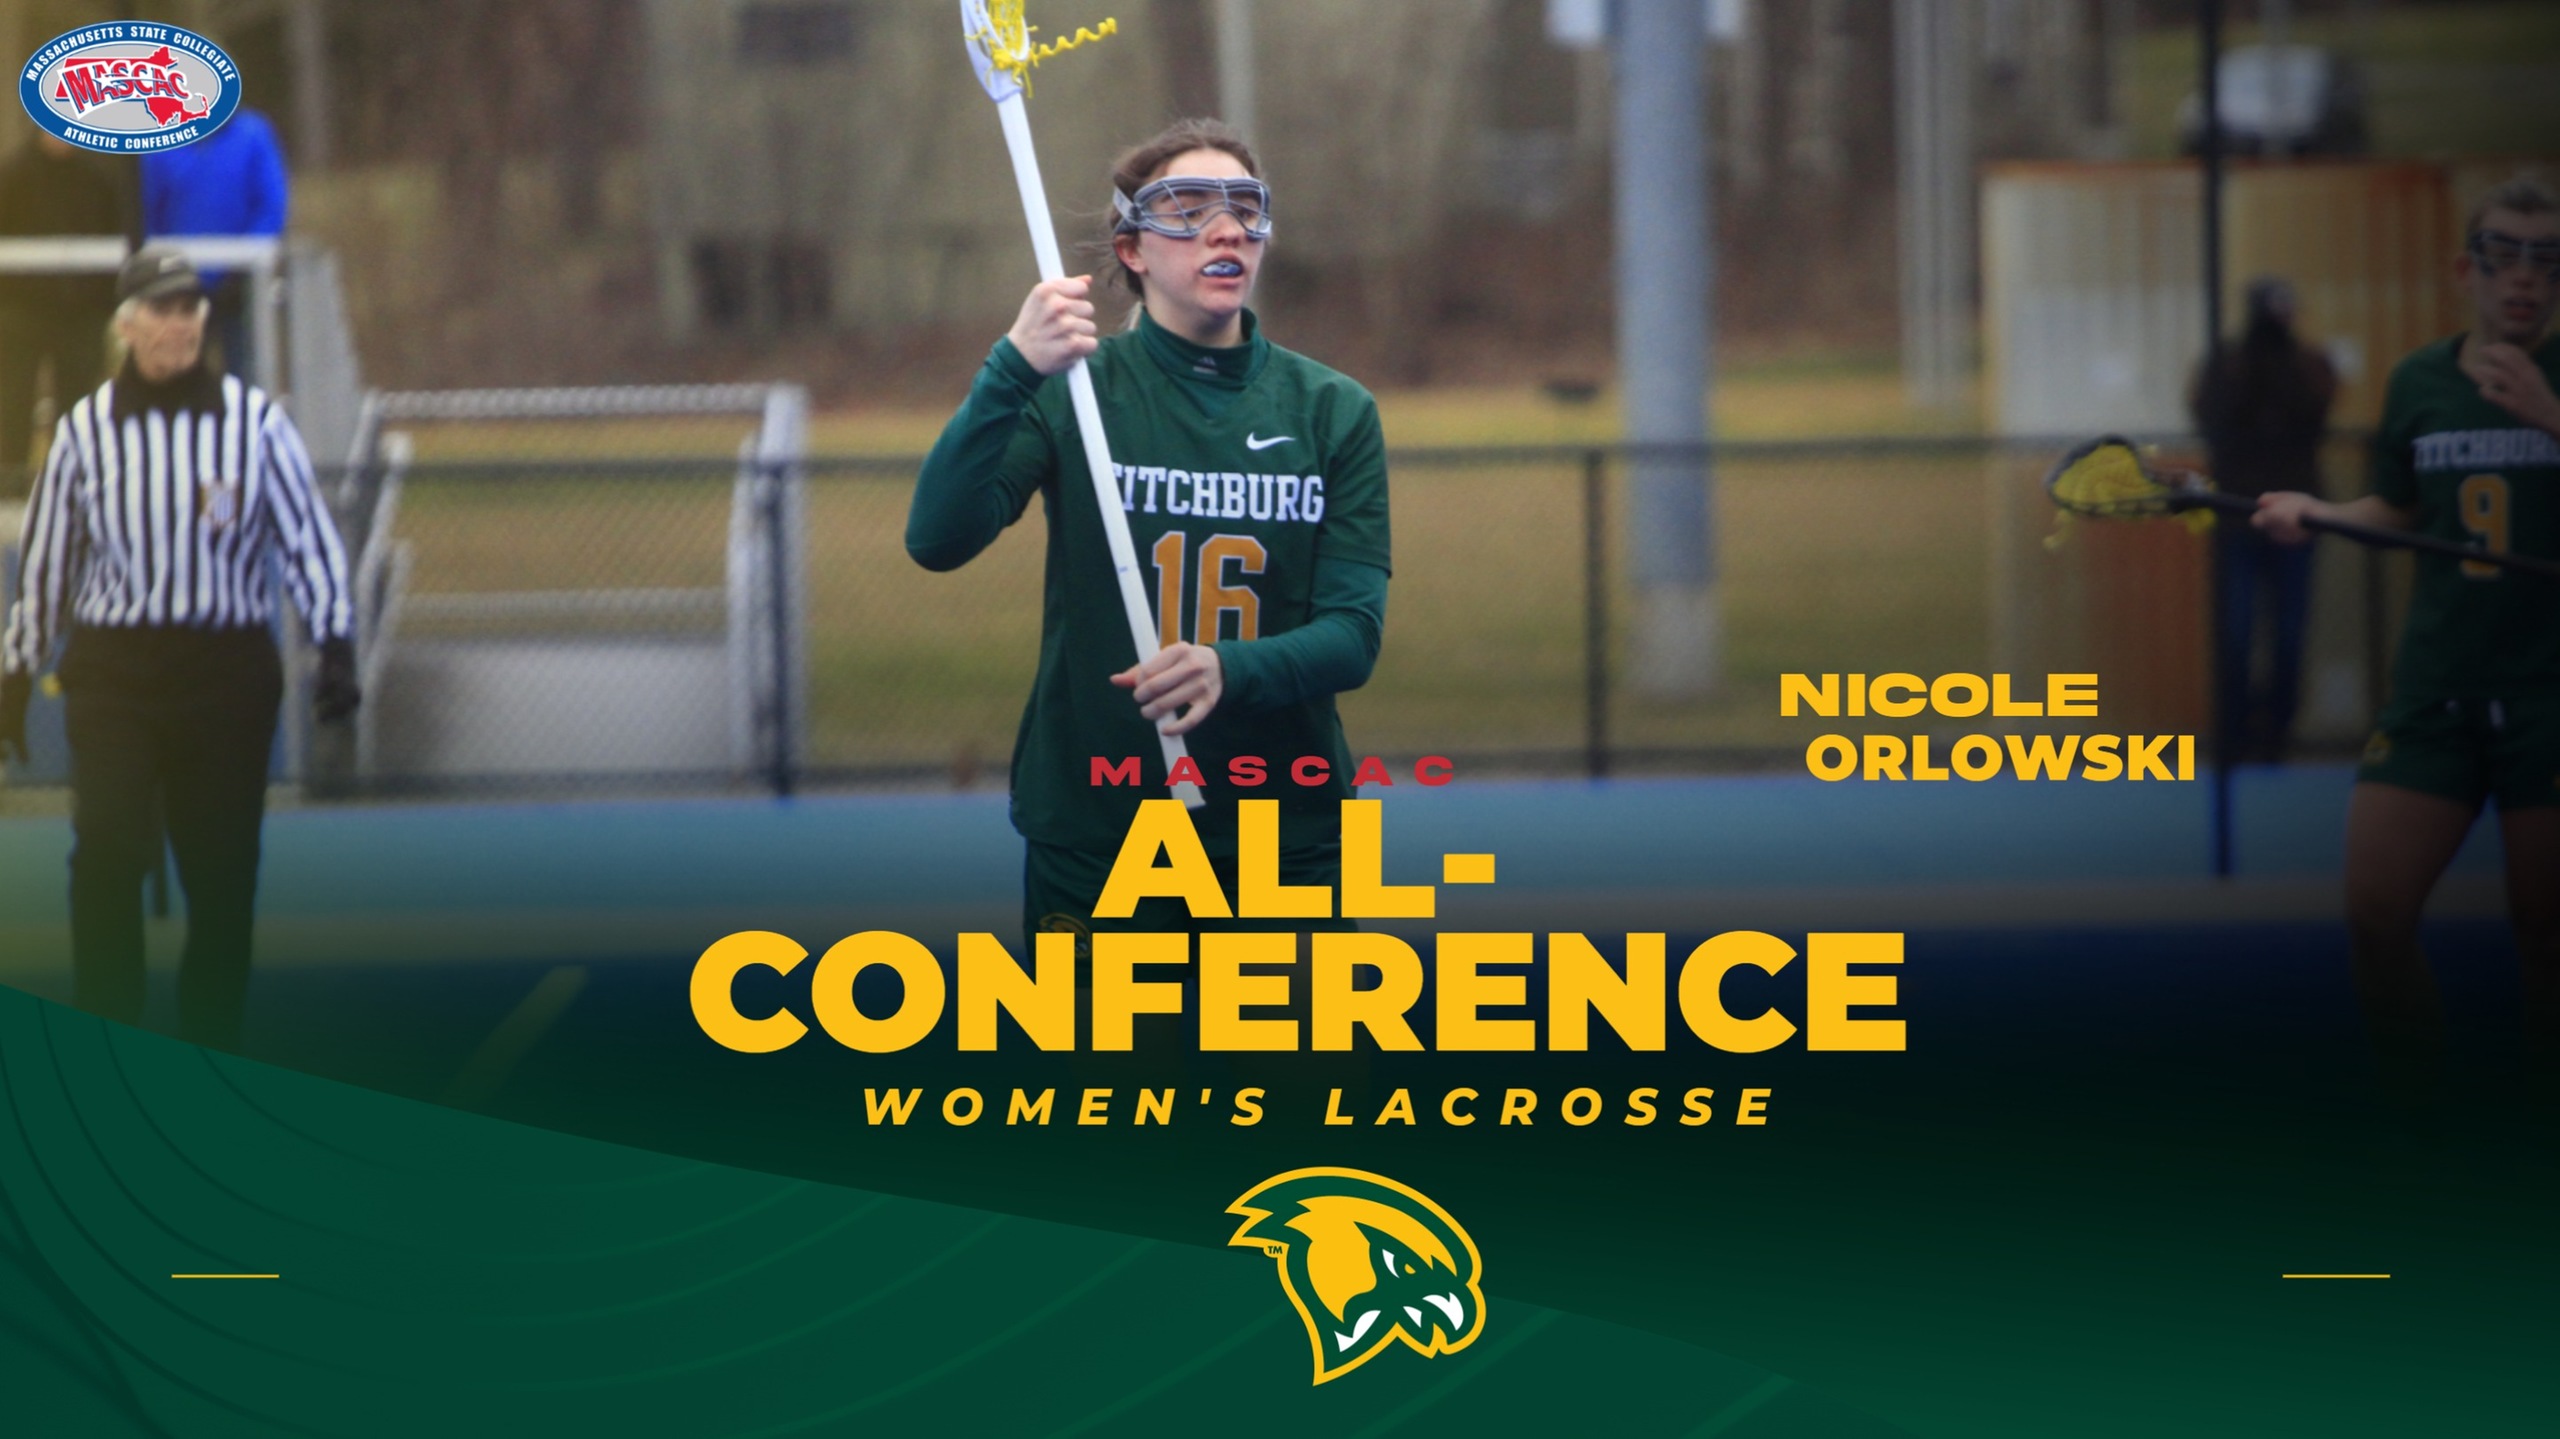 Orlowski Collects MASCAC All-Conference Honors